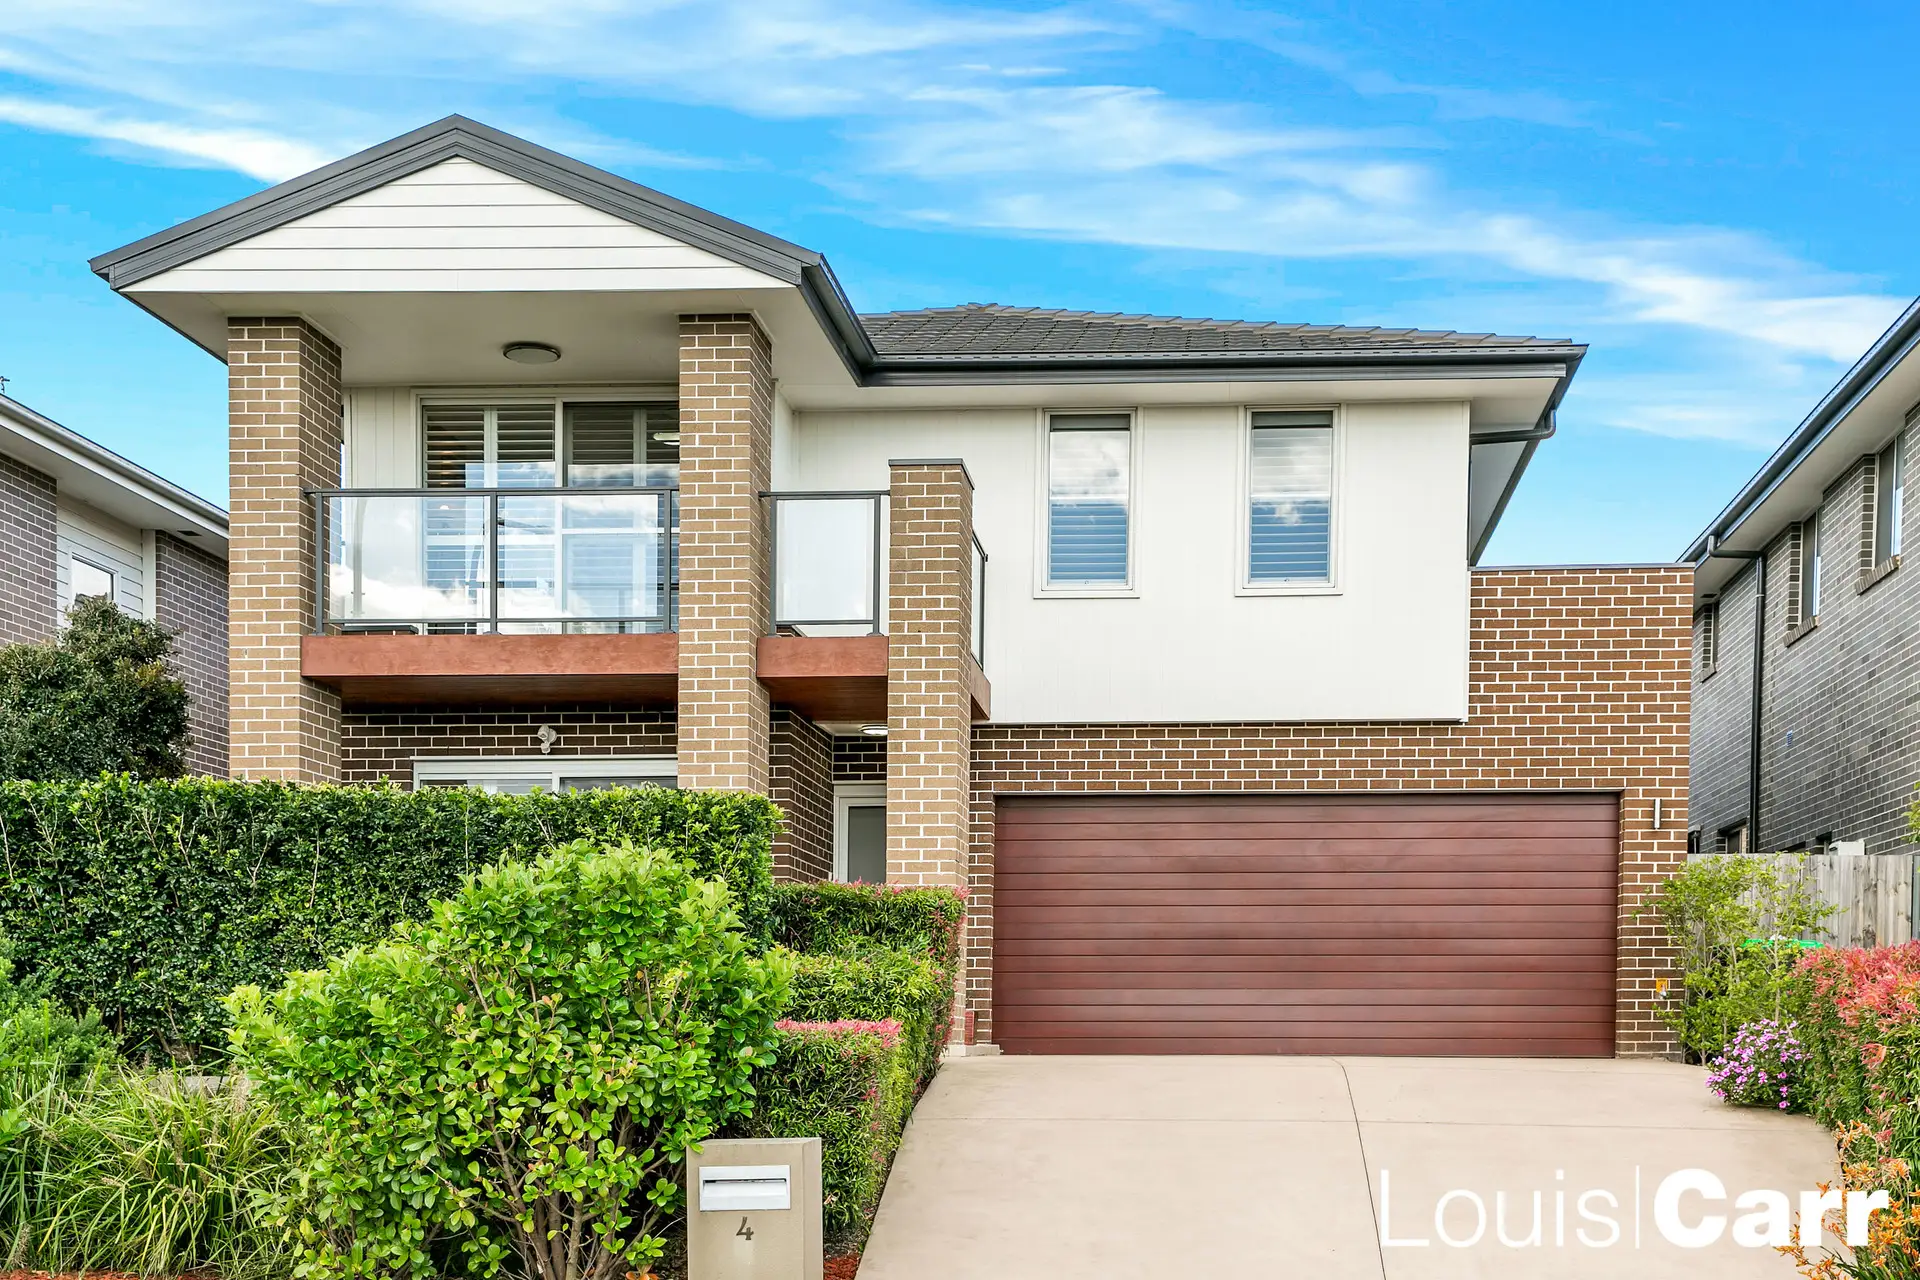 Photo #1: 4 Carisbrook Street, North Kellyville - Sold by Louis Carr Real Estate